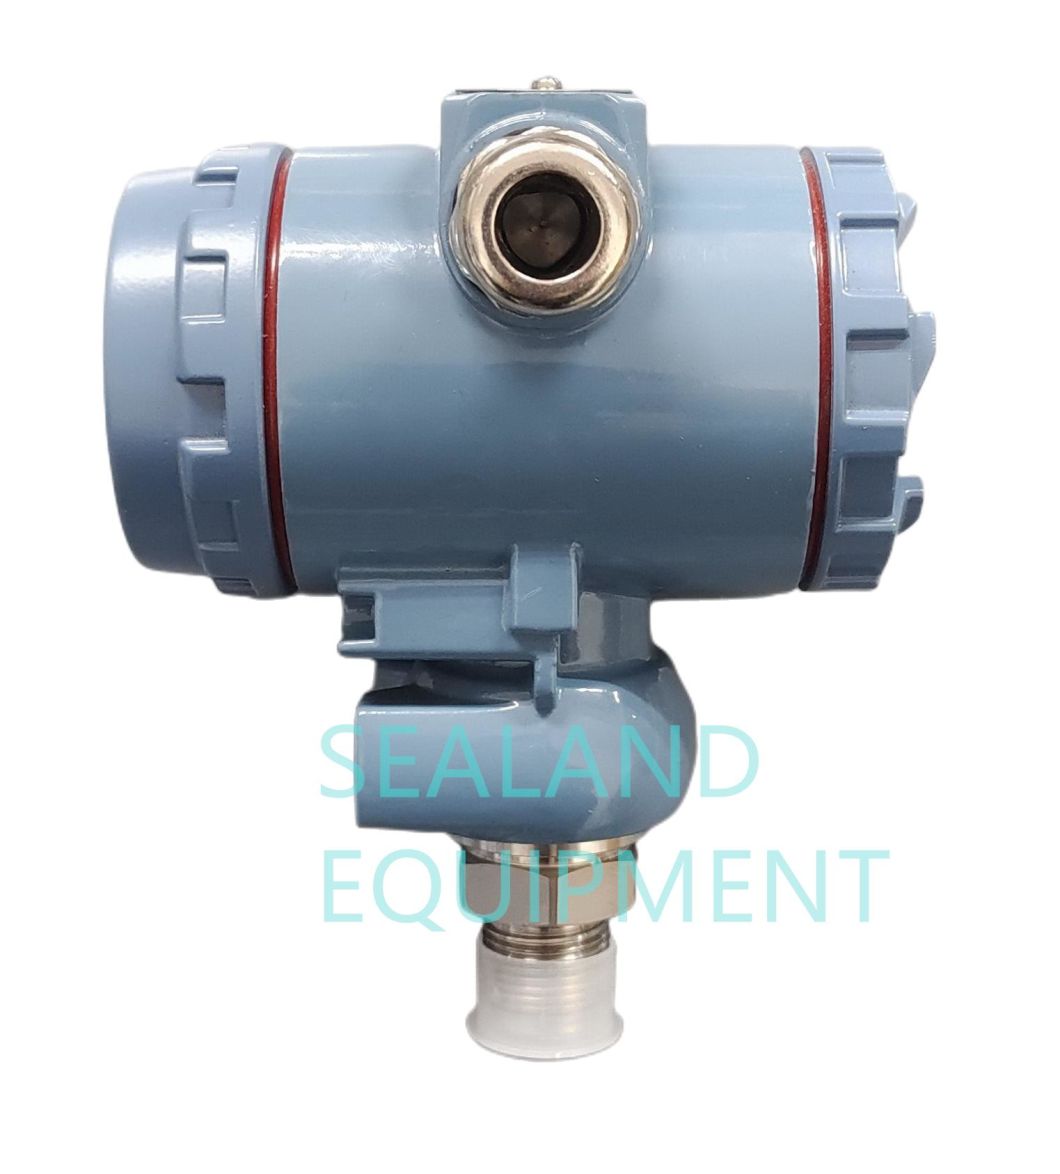 Air Liquid Water Remote Pressure Transmitter Type Smart Differential Pressure Transmitter Made in China